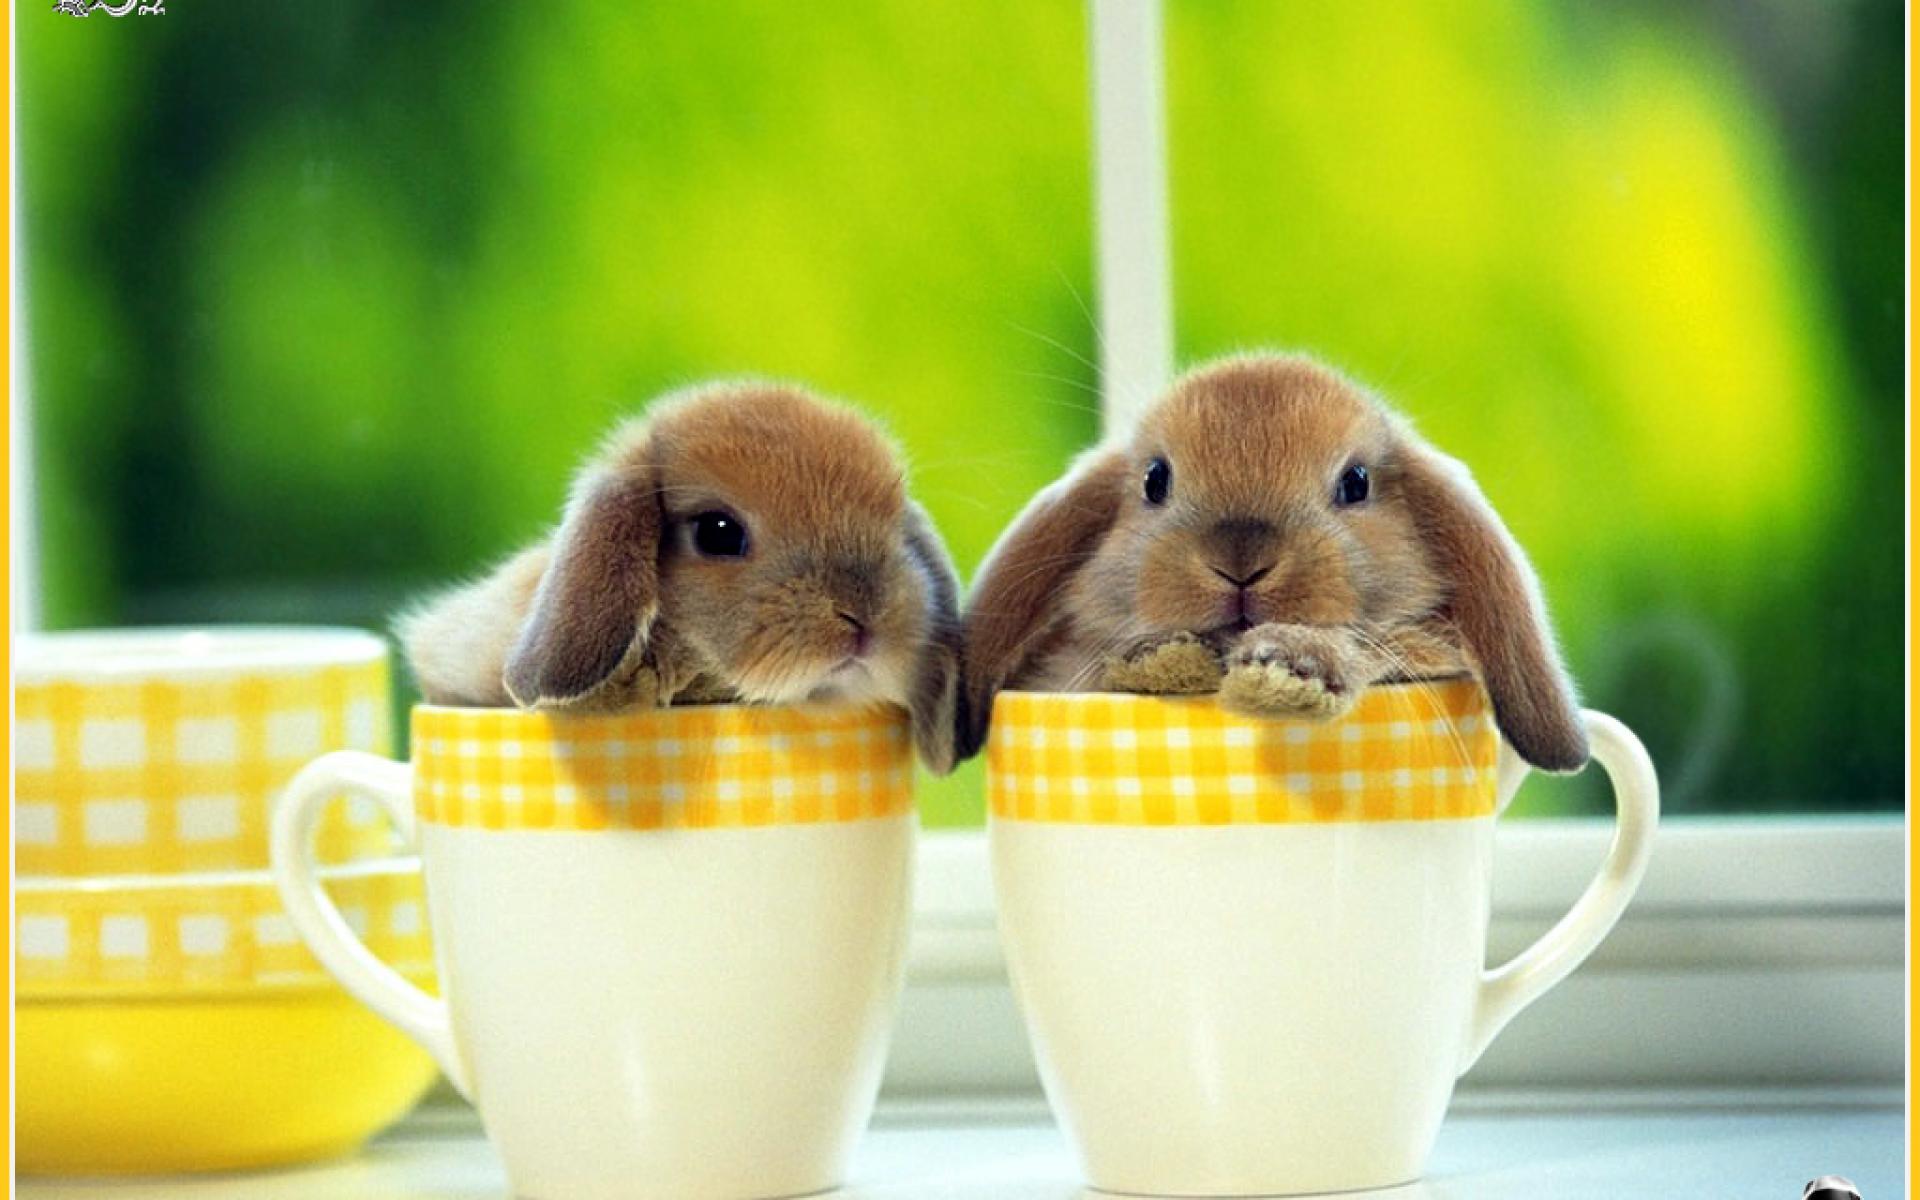 Rabbit Wallpapers and Background Images   stmednet